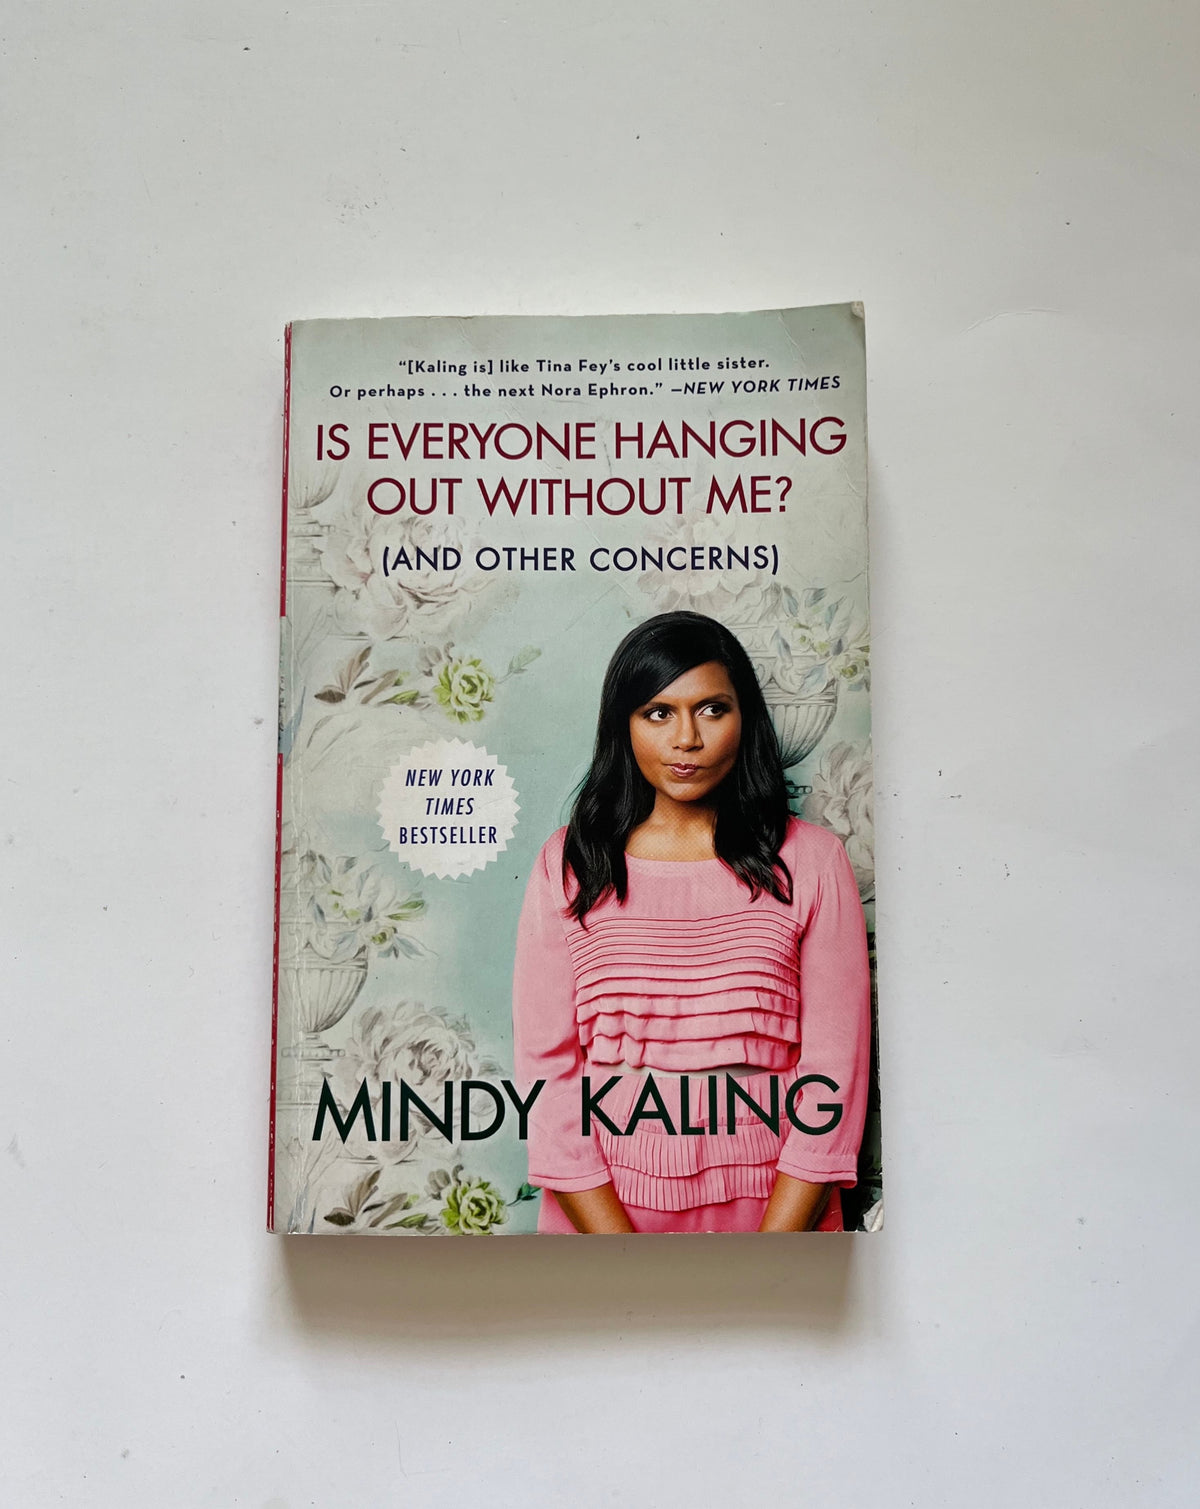 DONATE: Everyone Hanging Out Without Me? (And Other Concerns) by Mindy Kaling